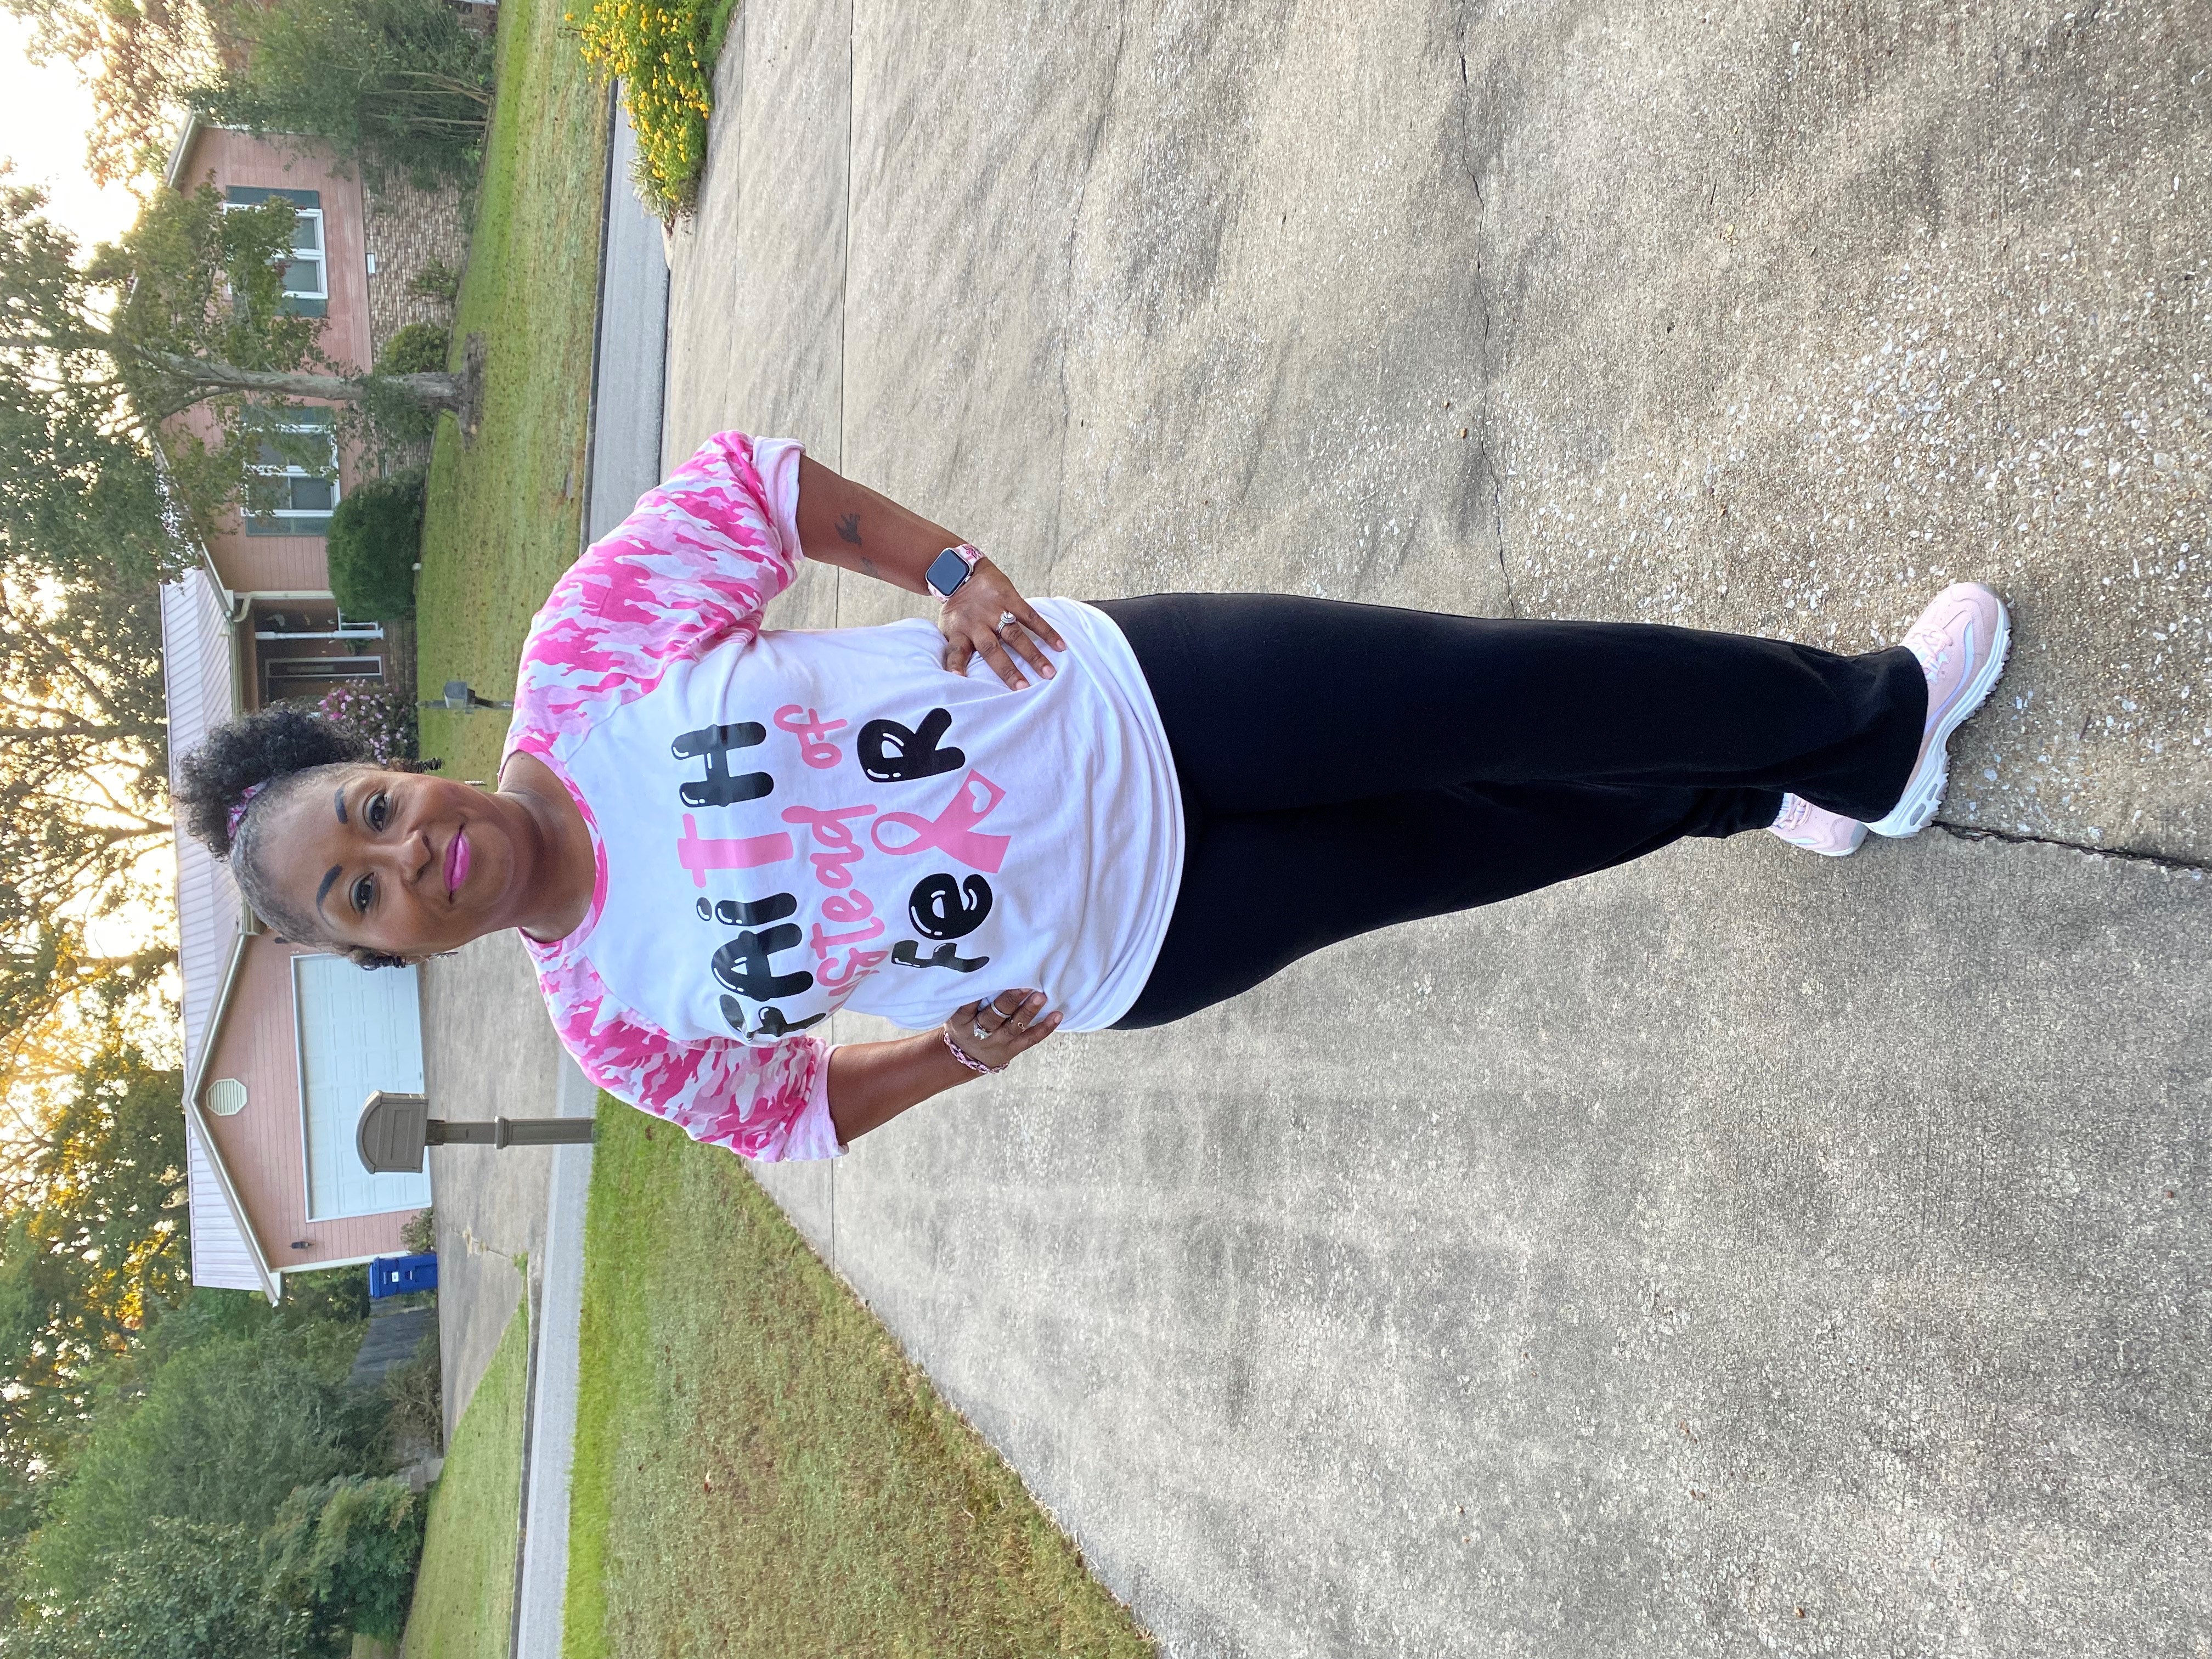 " I am a 6 year survivor and I have two sisters that are survivors as well. I feel that my family is blessed due to early detection and I encourage women to get your mammograms and self-exam weekly! "-Tiffany Young, Eastern Division Metering Assistant